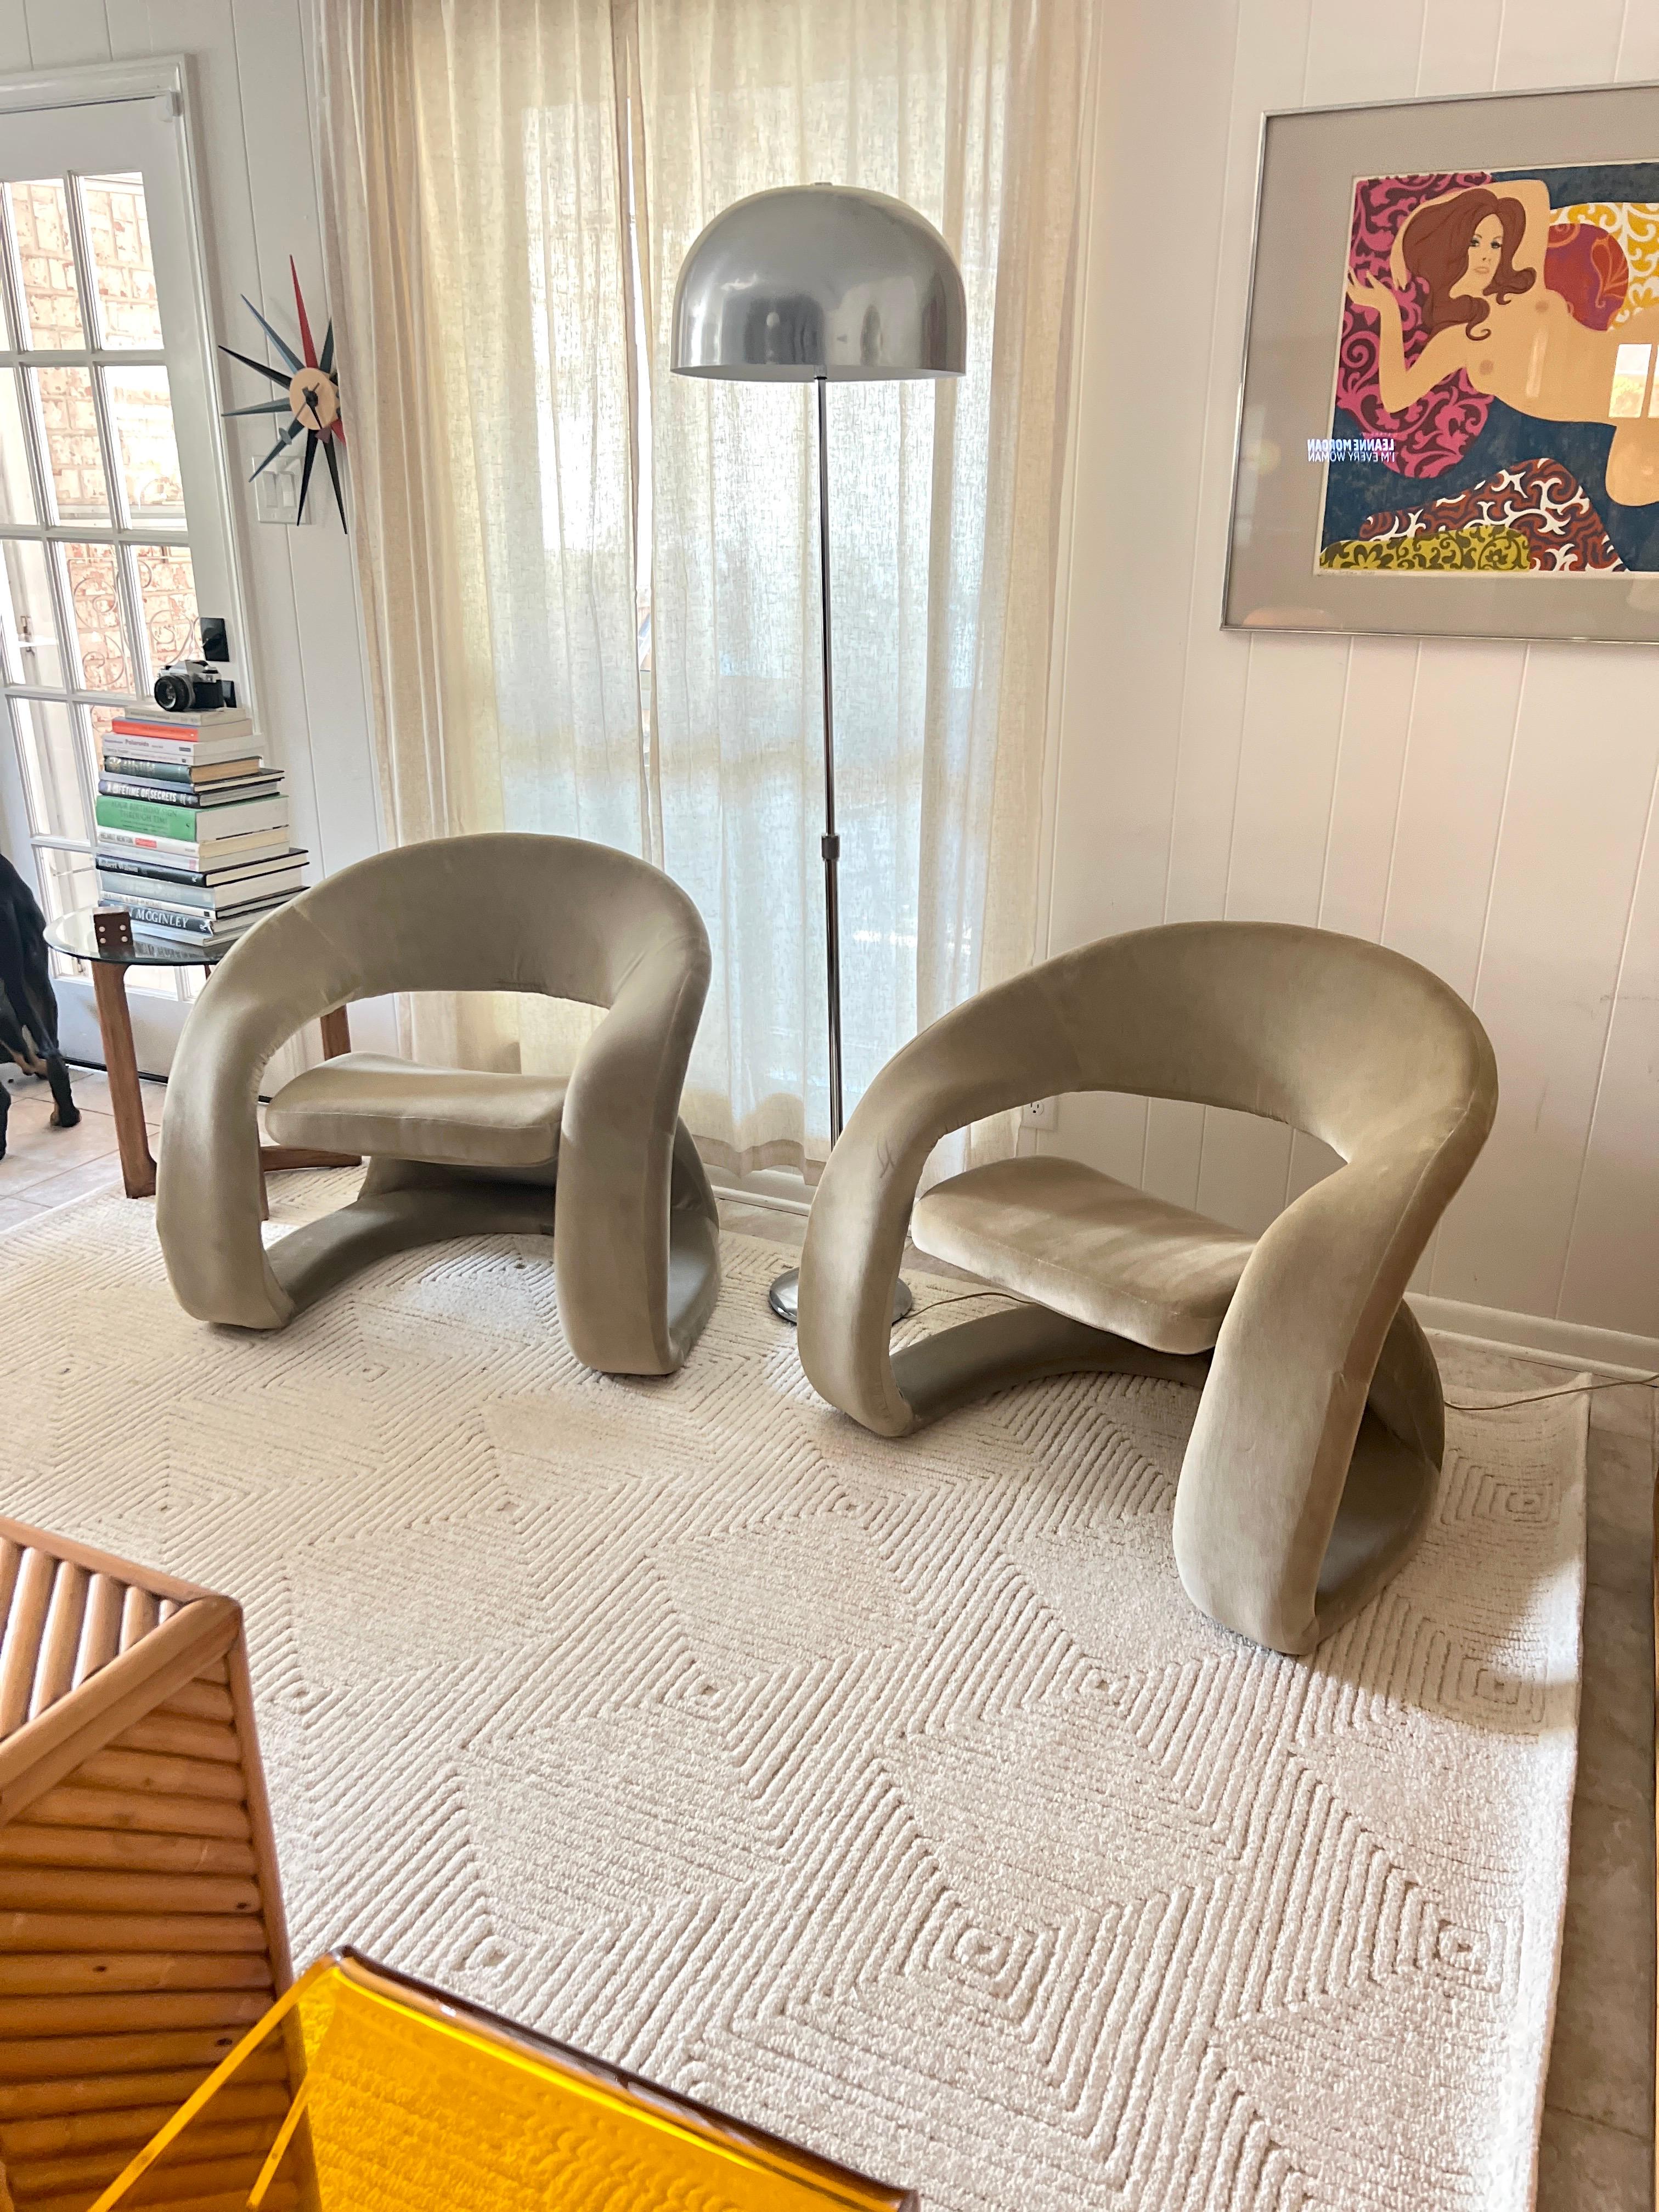 A pair of sculptural tongue chairs in the style of Jaymar, circa 1980s-1990s. Recently recovered in a sage green velvet fabric (100% cotton), these chairs are just as stylish as they are comfortable. Overall in very good condition. There is no